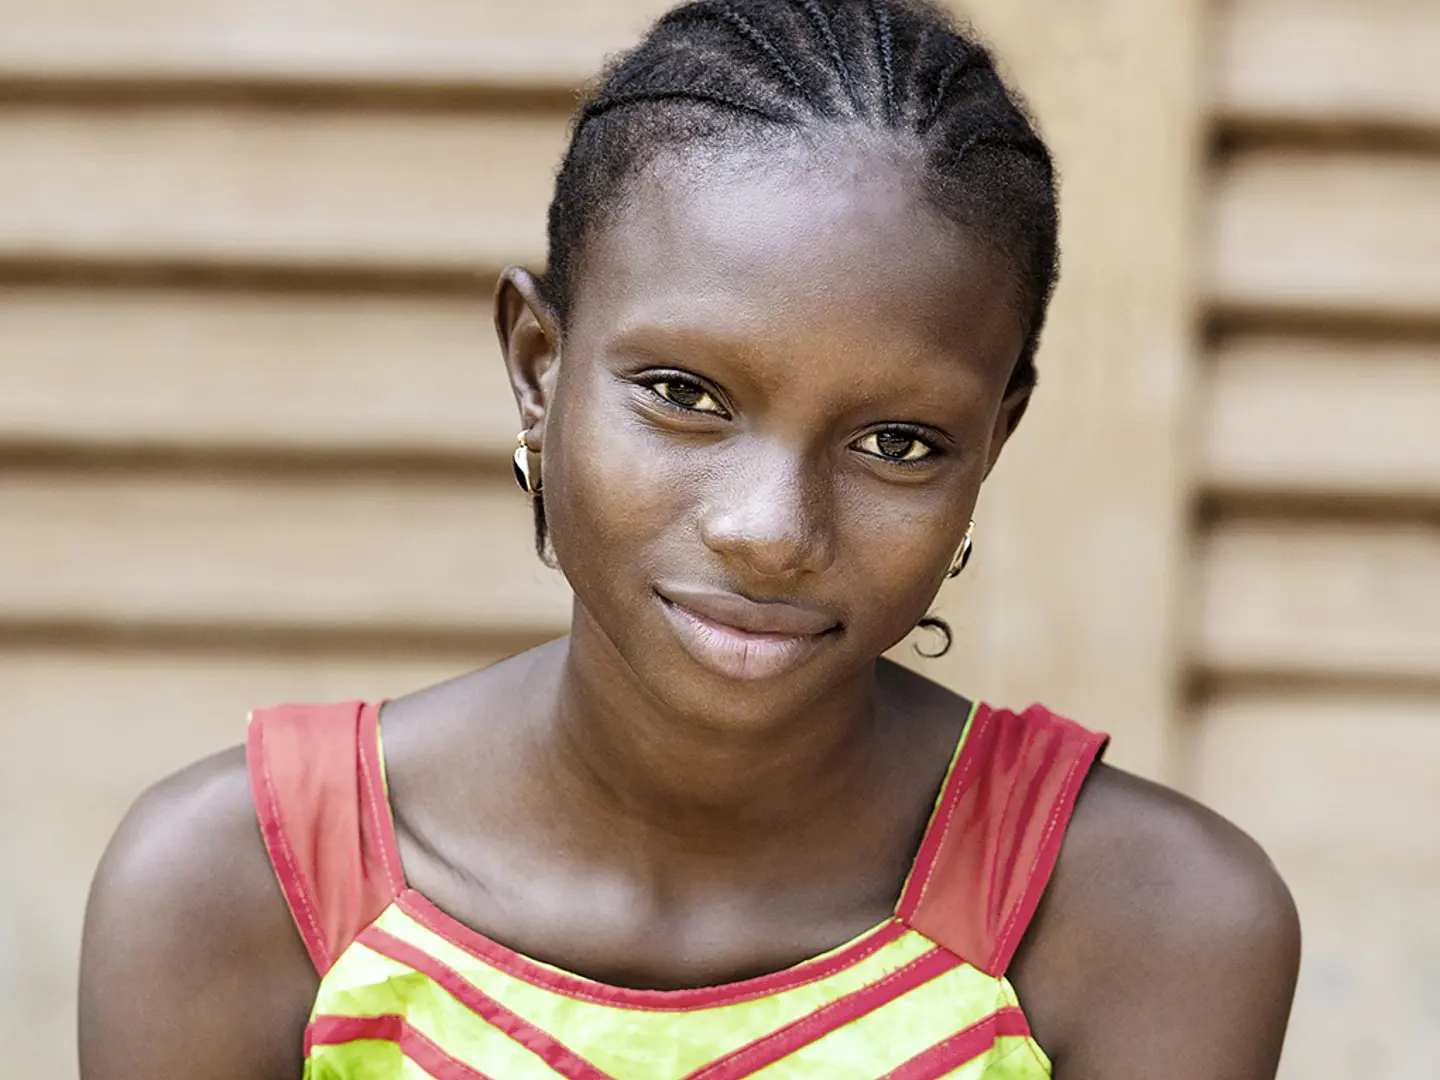 A teenage girl from Africa smiles at the camera.